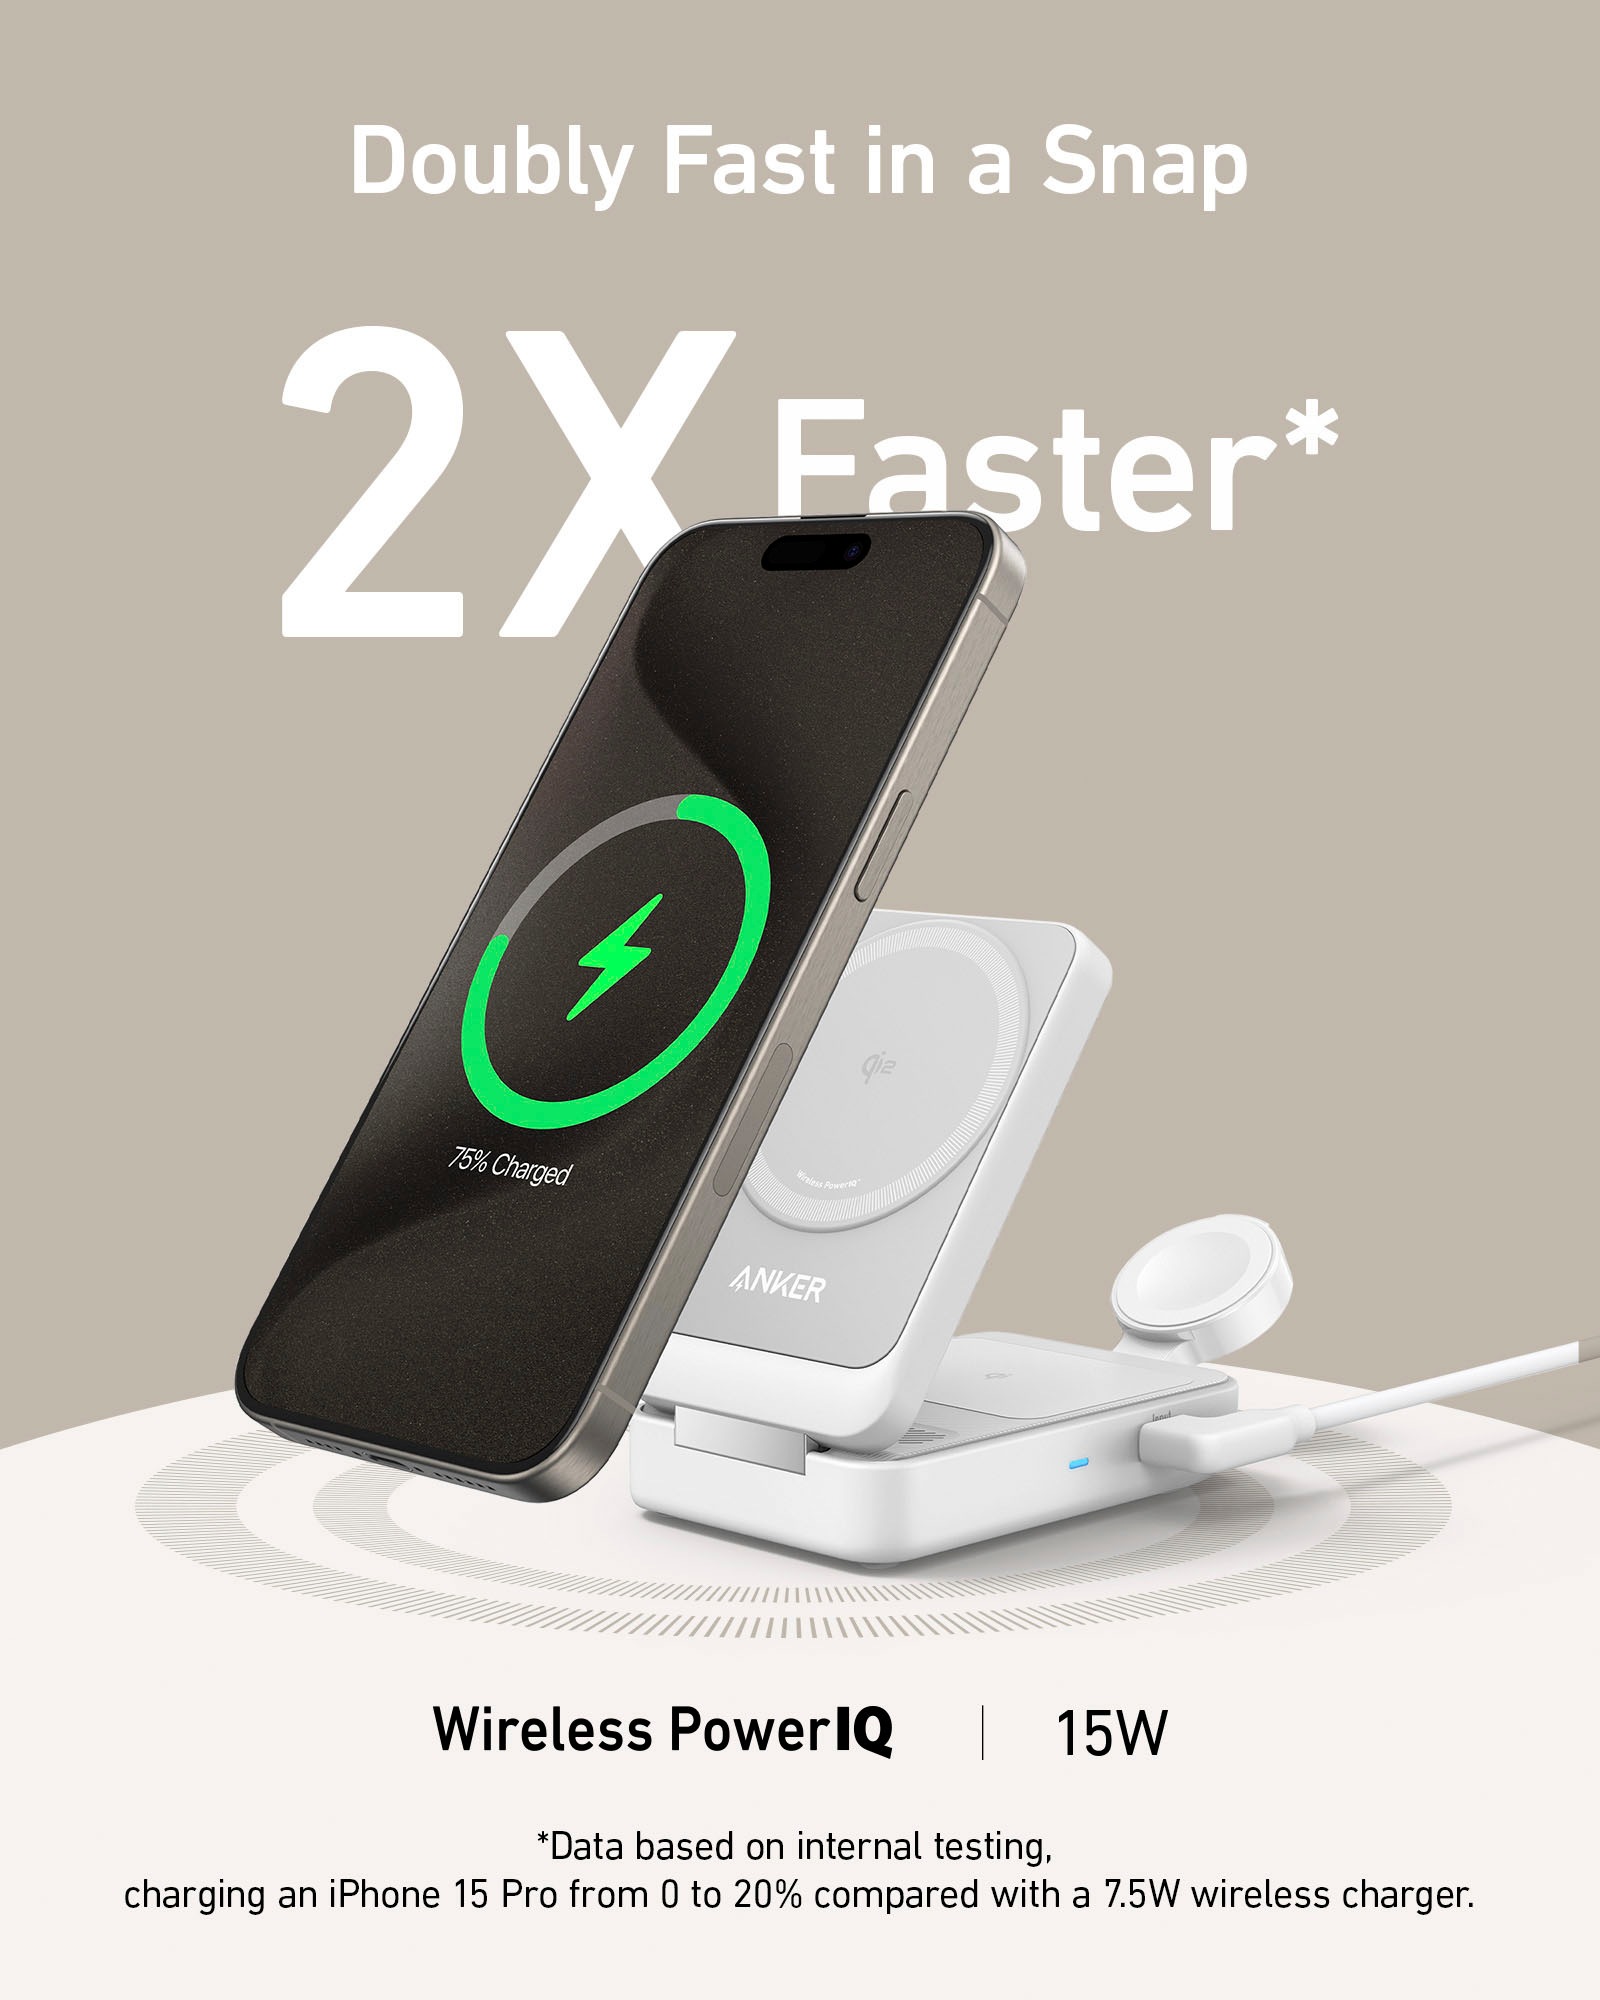 Anker Wireless Charger »MagGo Wireless Charging Station (Foldable 3-in-1)«